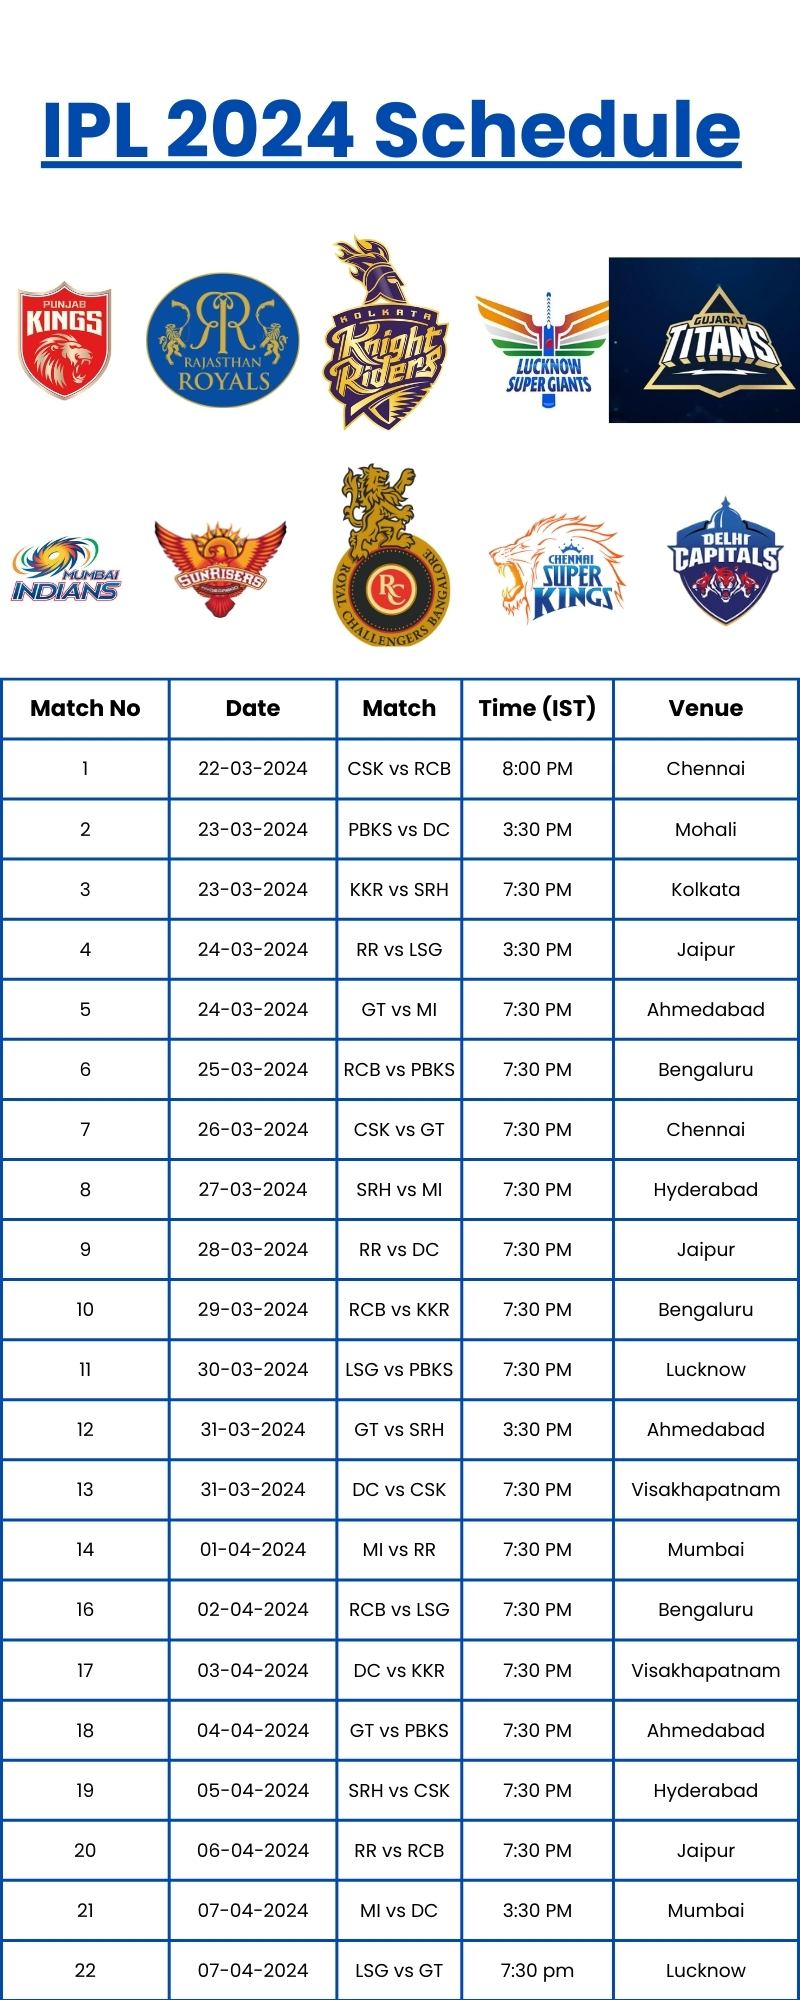 ipl 2024 schedule image for the 1st 2 weeks